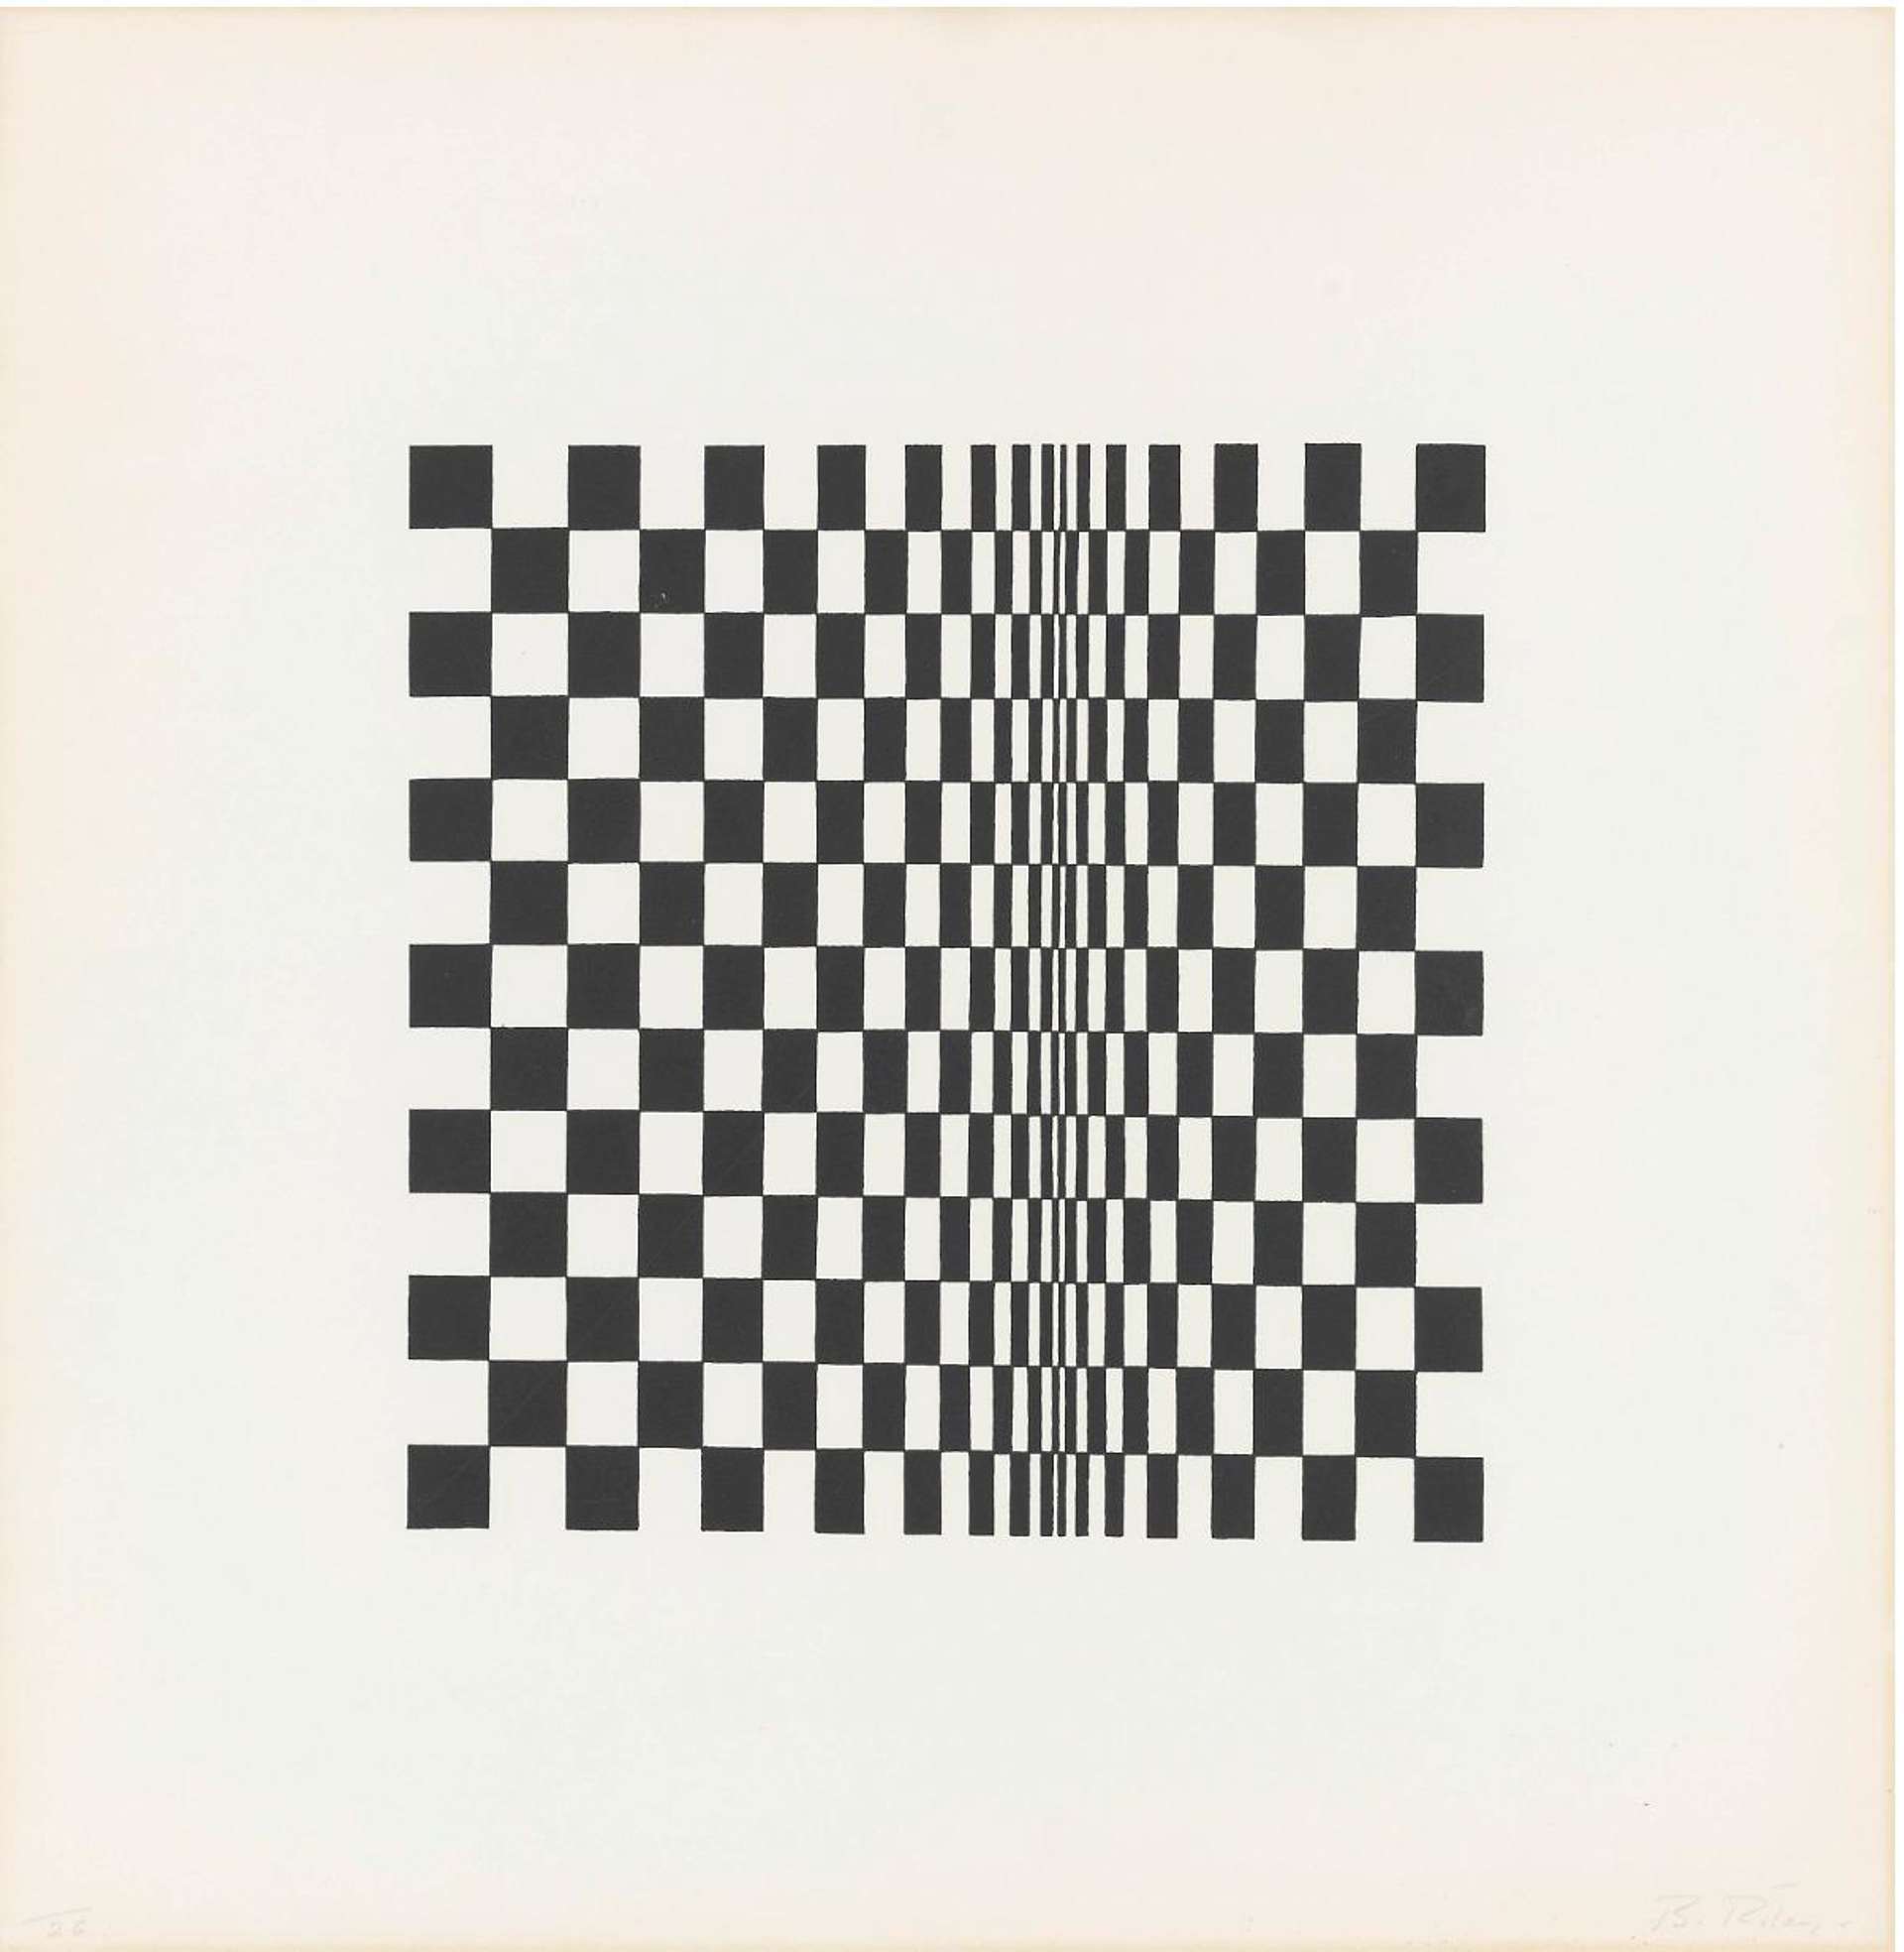 Bridget Riley’s Untitled (Based On Movement In Squares). An Op Art screenprint of a pattern of black and white squares in the shape of a larger square. 